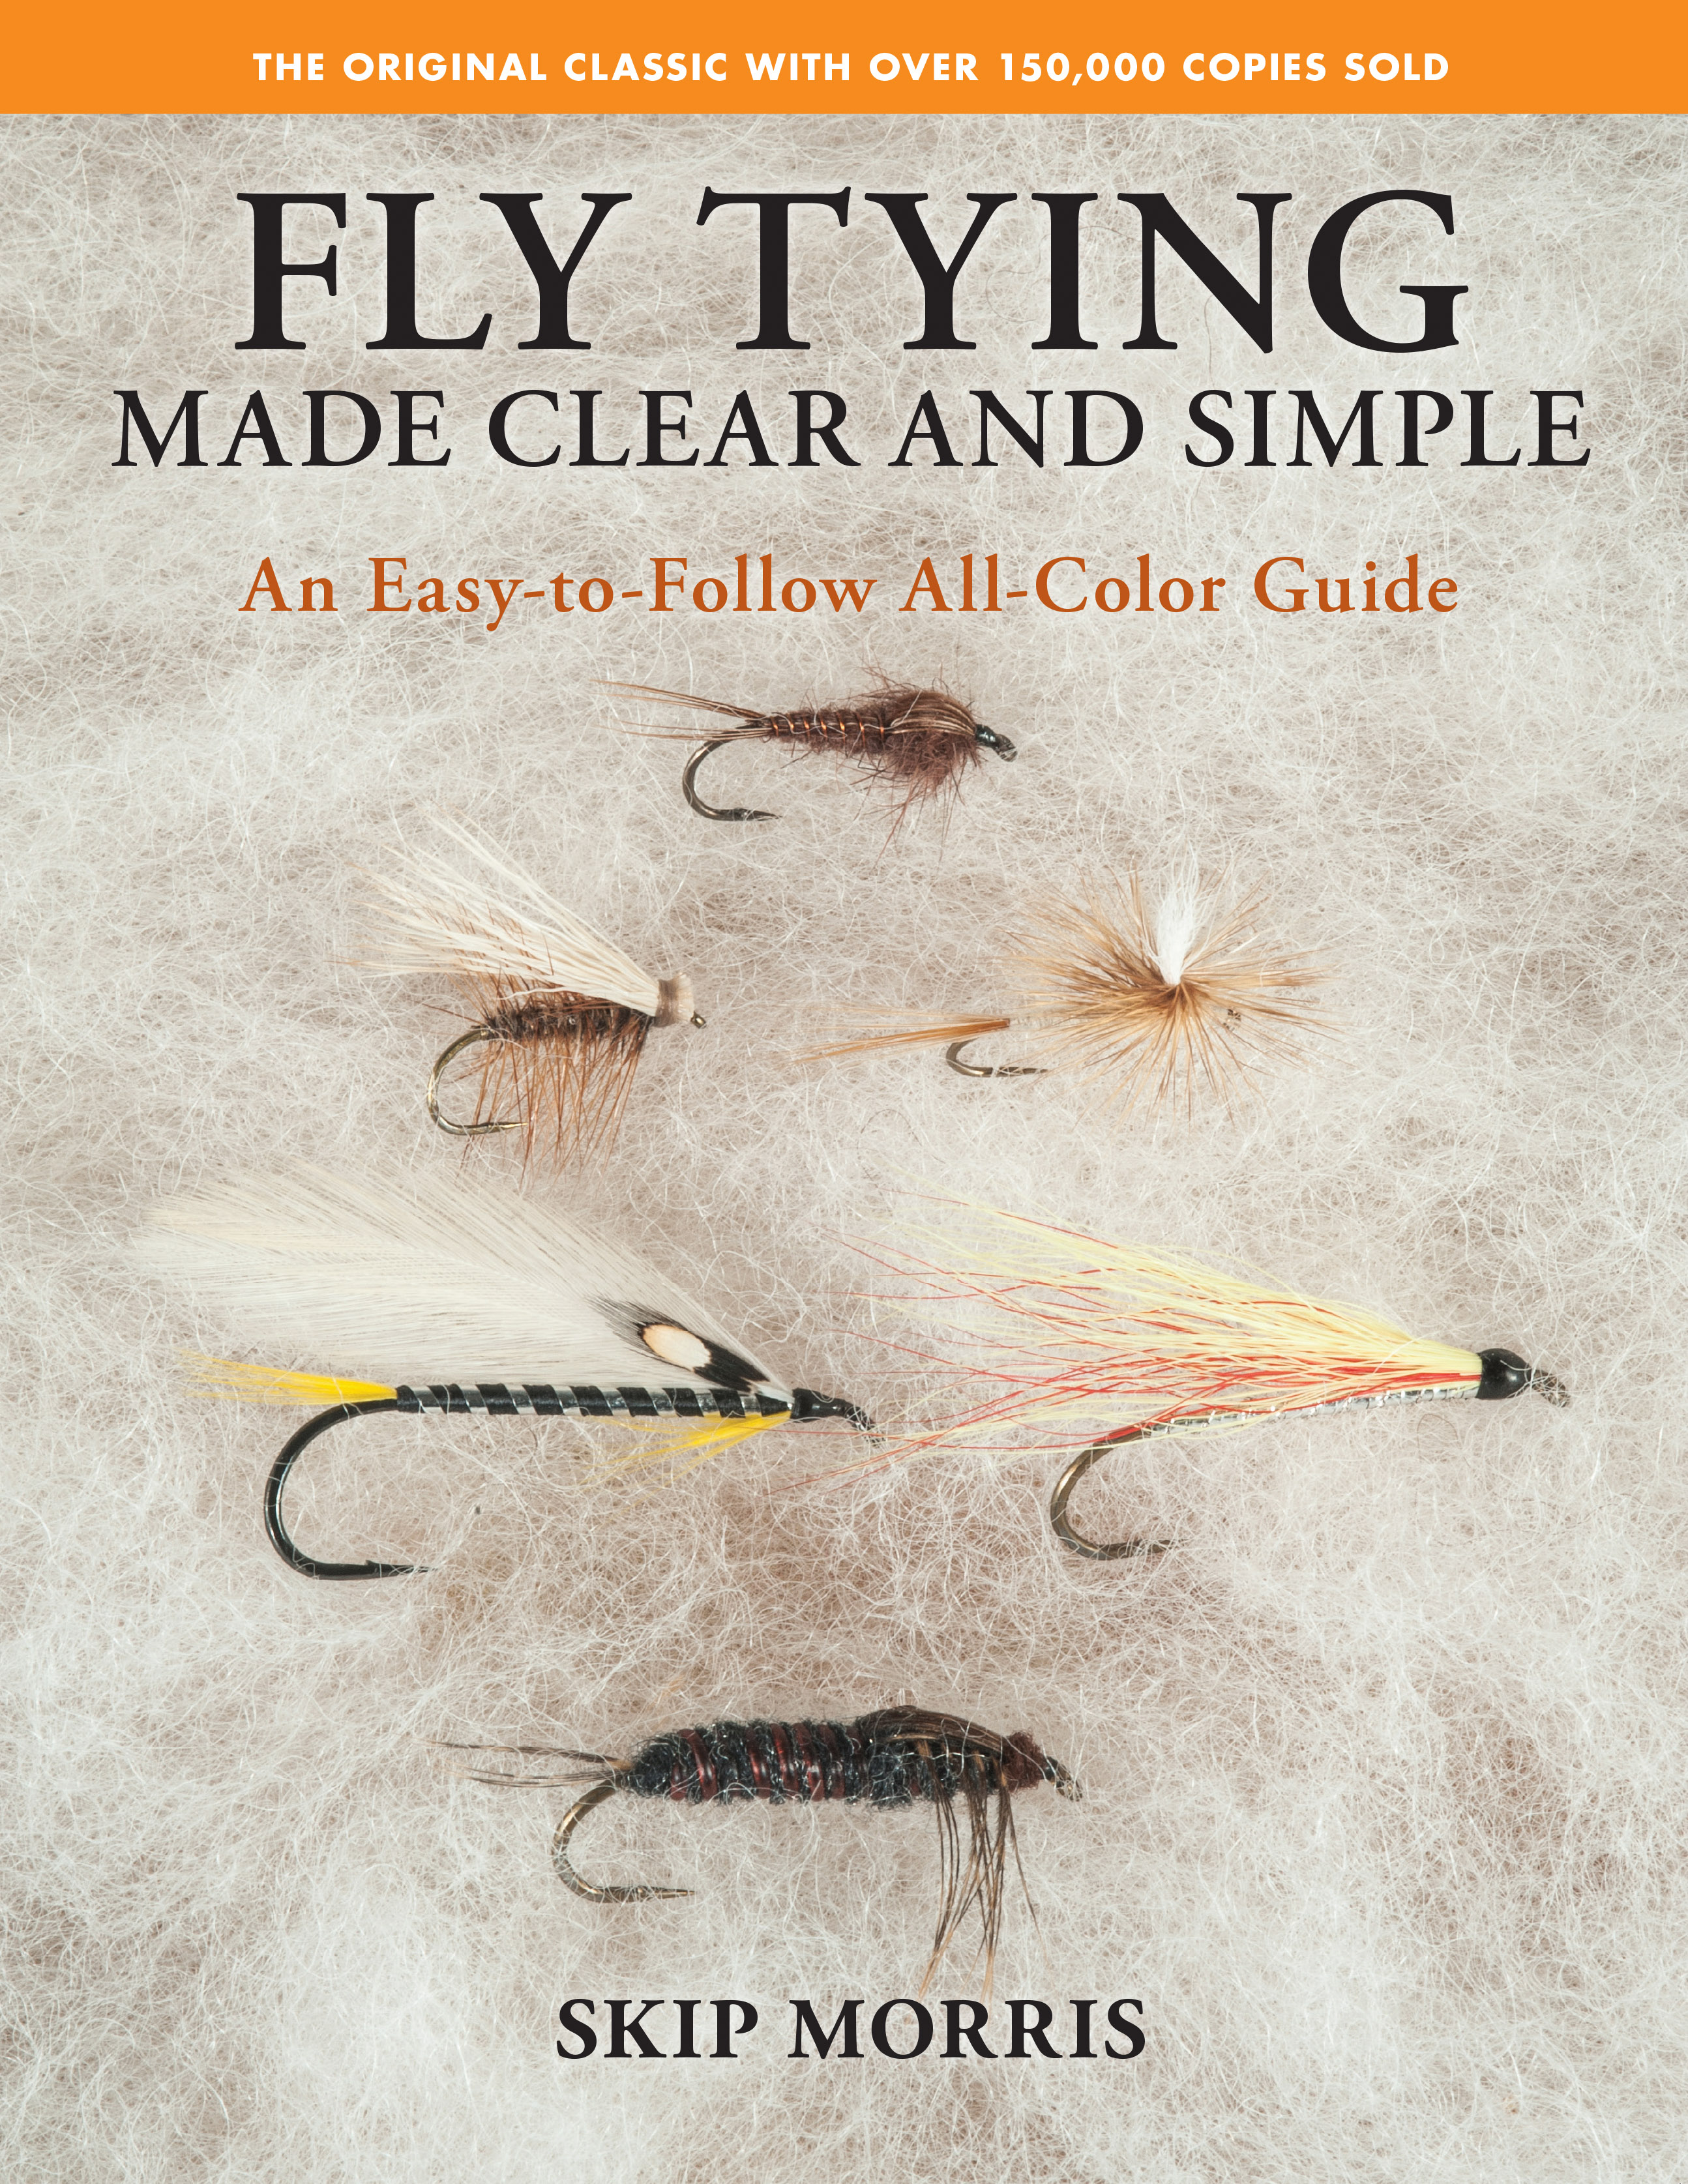 Fly Tying Made Clear and Simple by Skip Morris